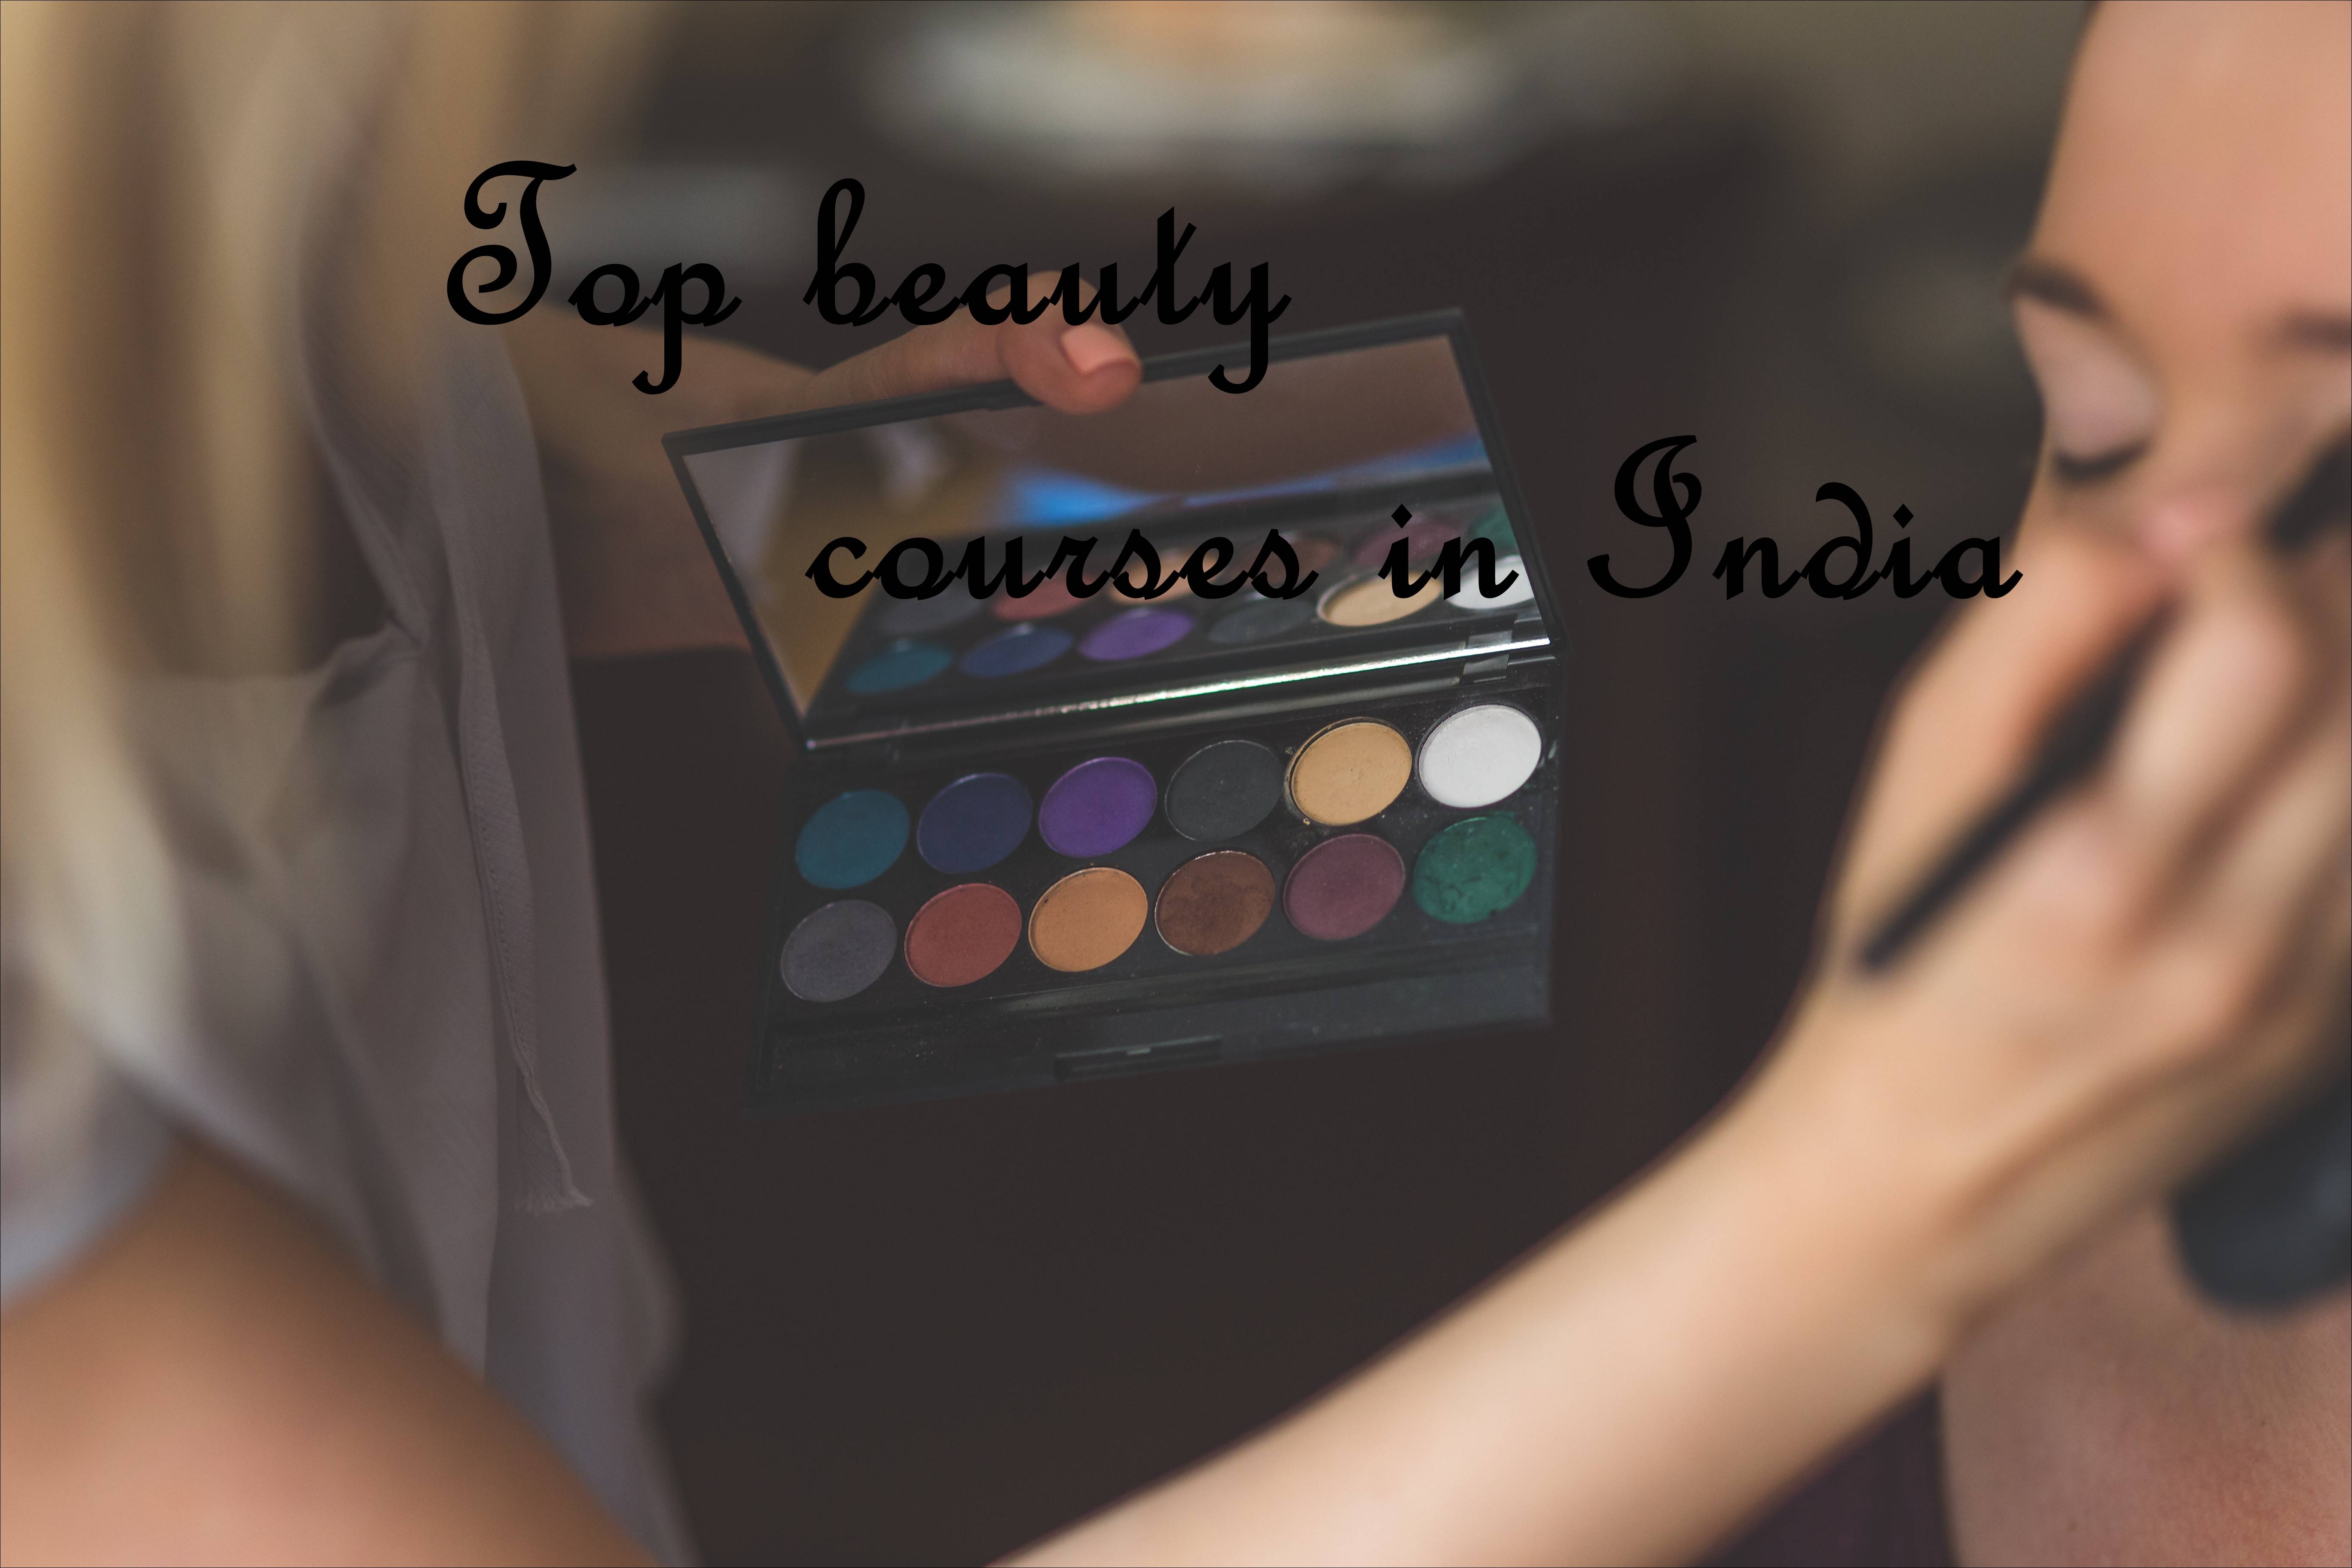 Top beauty courses in India